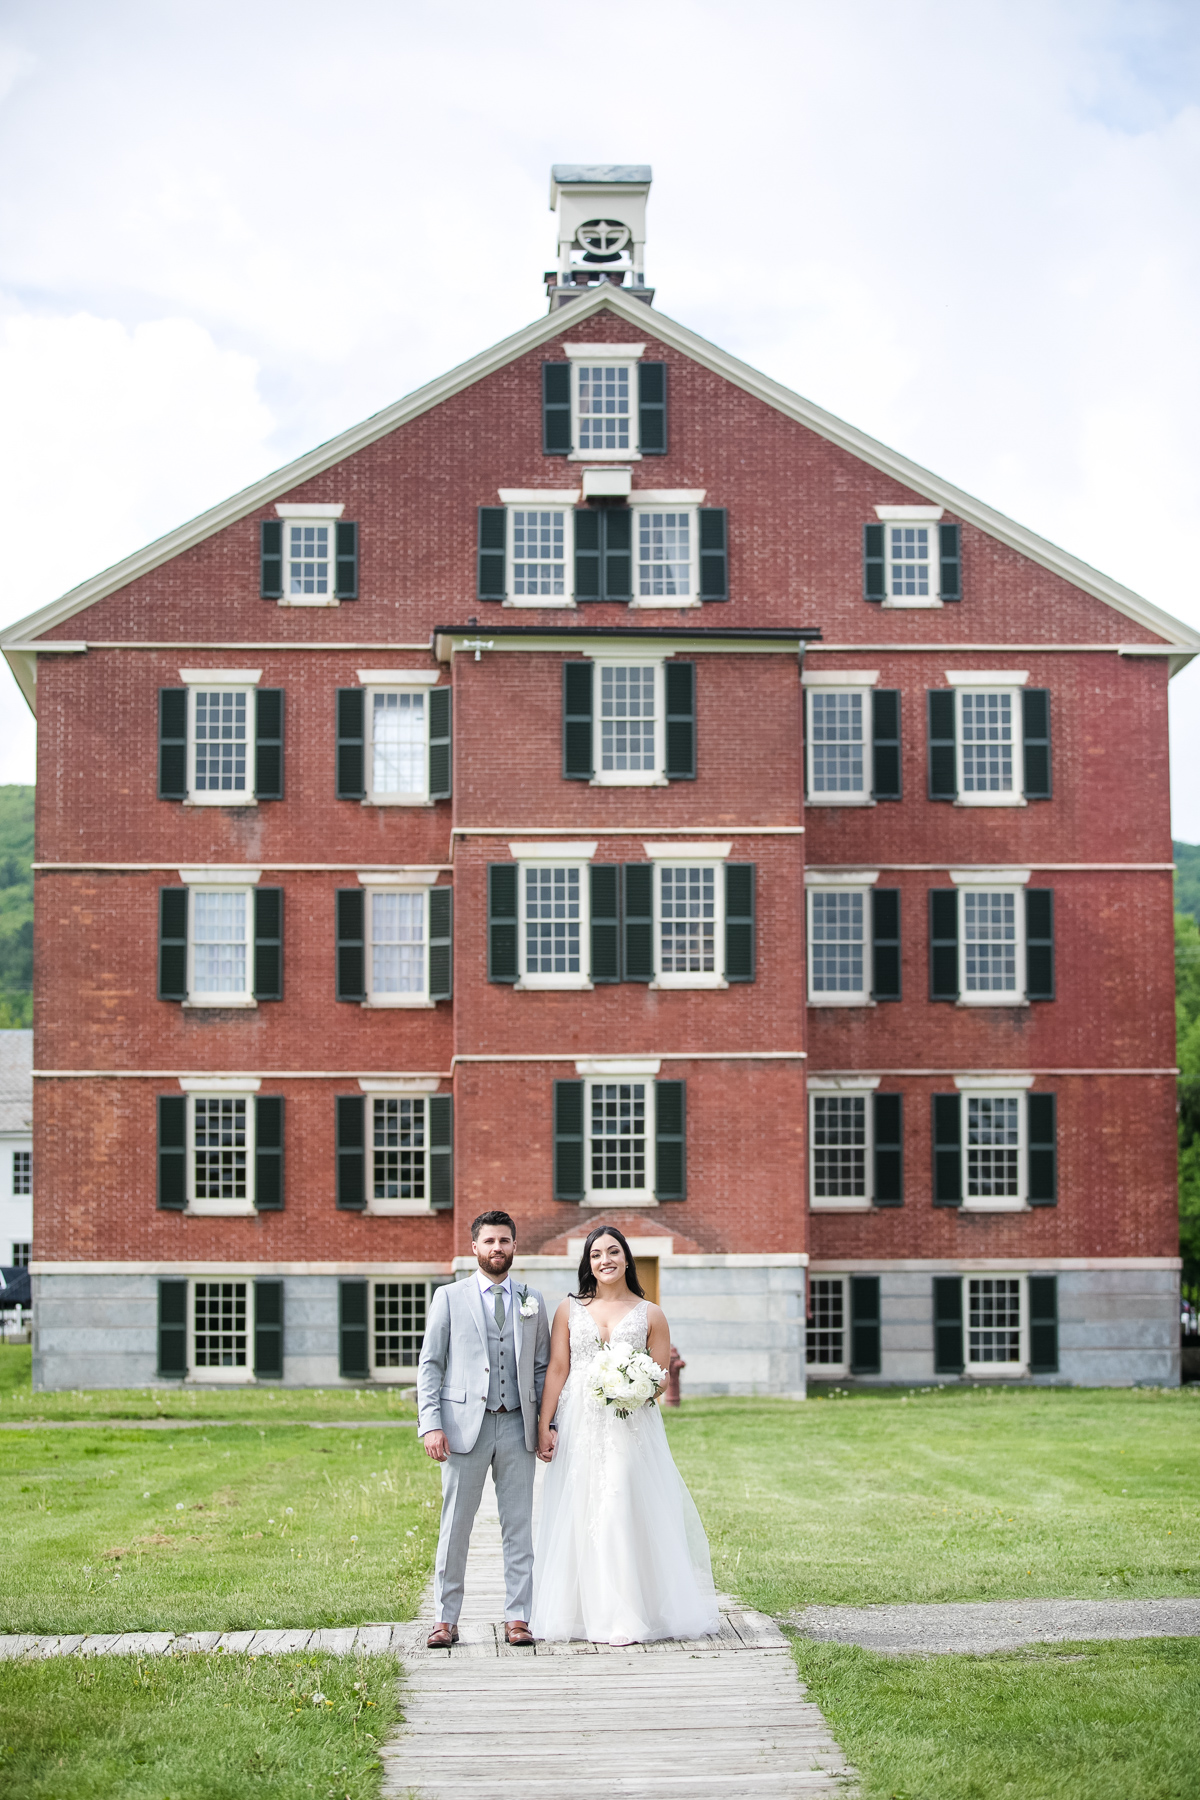 The couple having a moment alone at Hancock Shaker Village on their wedding day.